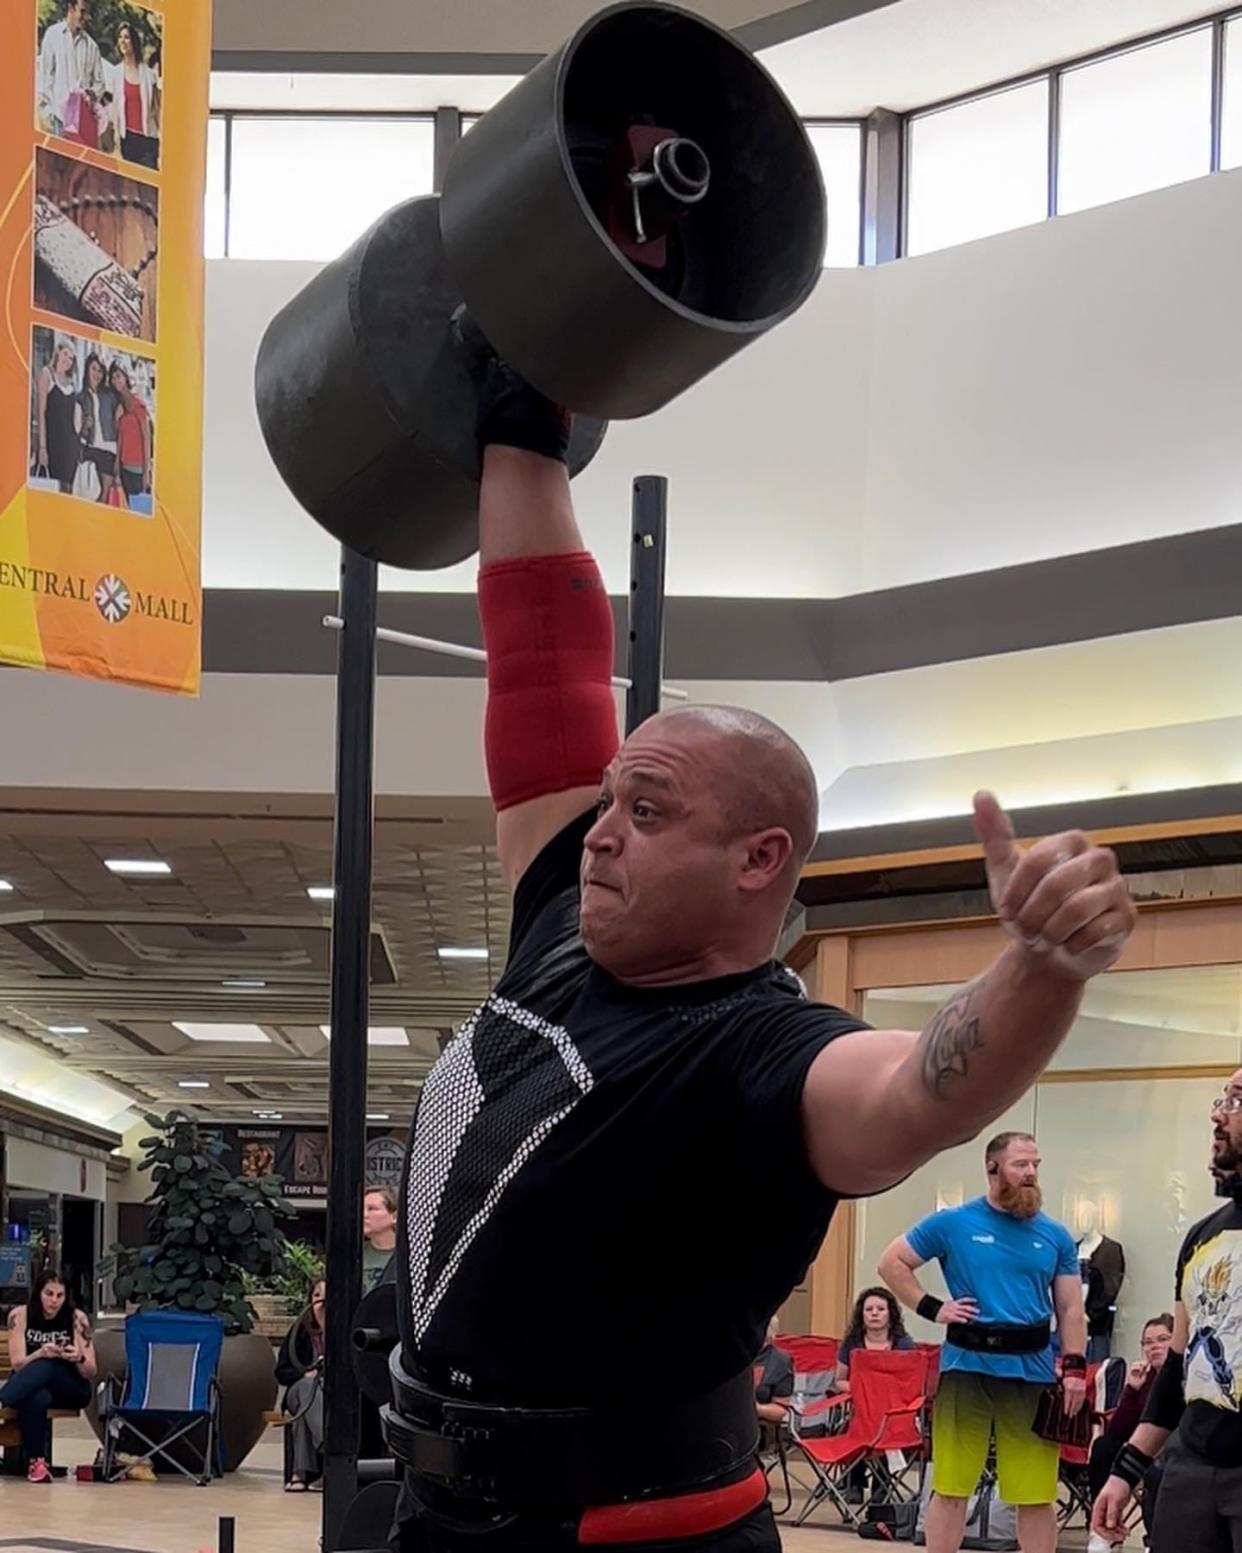 Salina firefighter Chris Rios lifts a weight during a strongman competition at Central Mall in Salina. Rios traveled to and competed in the 2023 World's Strongest Firefighter Contest at the Arnold Sports Festival that took place at the beginning of March in Columbus, Ohio, where he placed 29th overall.